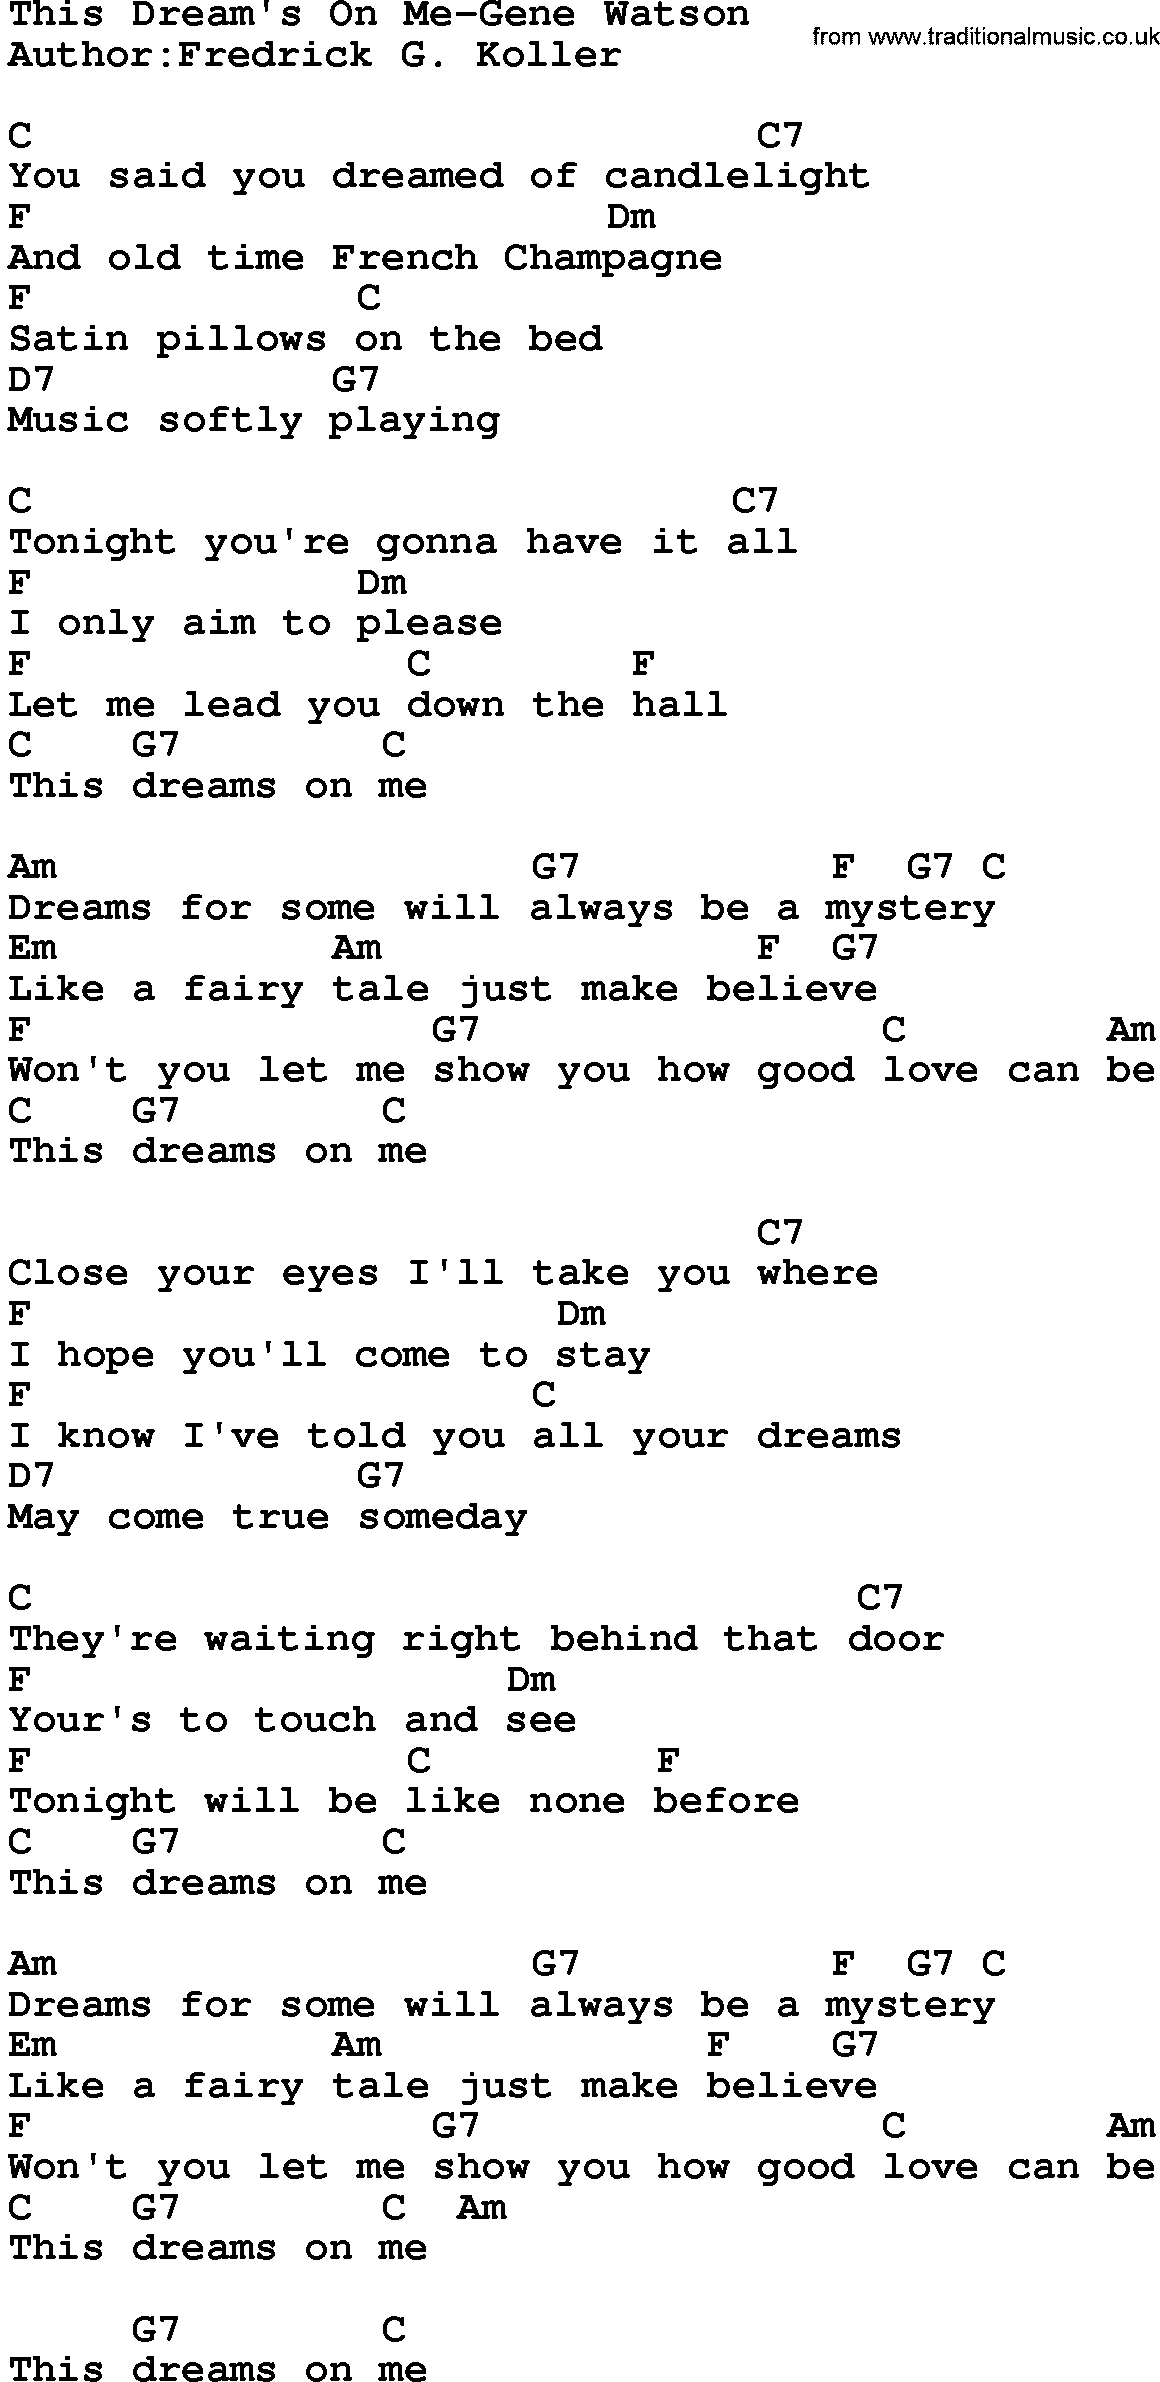 Country music song: This Dream's On Me-Gene Watson lyrics and chords